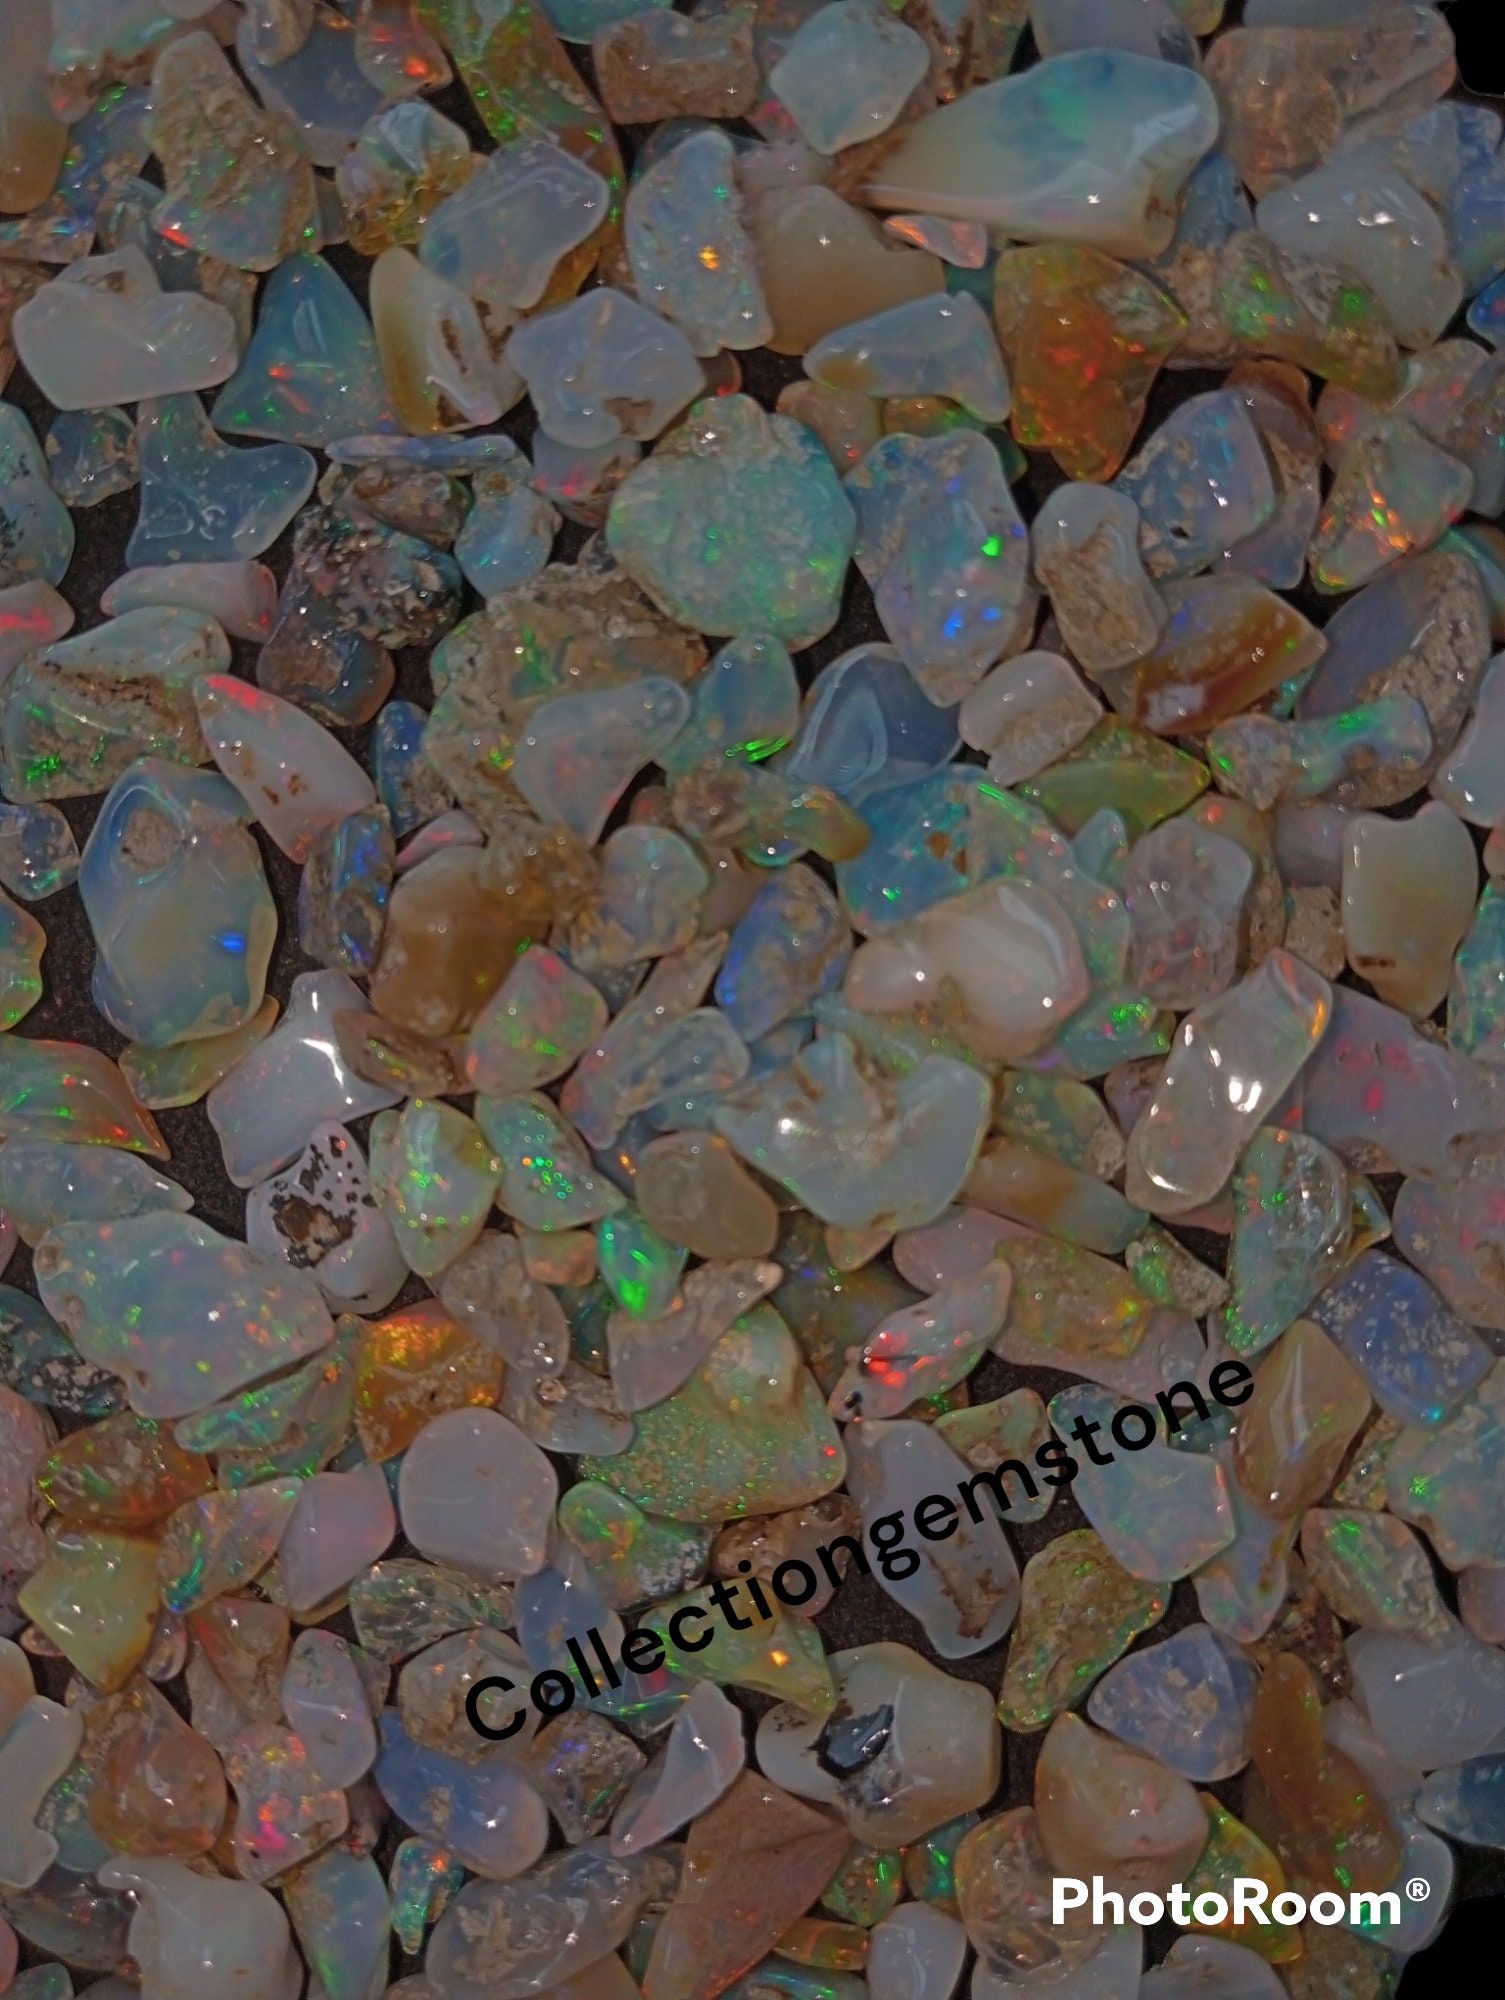 Natural Ethiopian Blue Opal Stone, Polished Uncut Gemstone, Ethiopian Opal  Cabochon Stone, Blue Opal Rough, 9x6mm 12x6mm 10 Pieces 